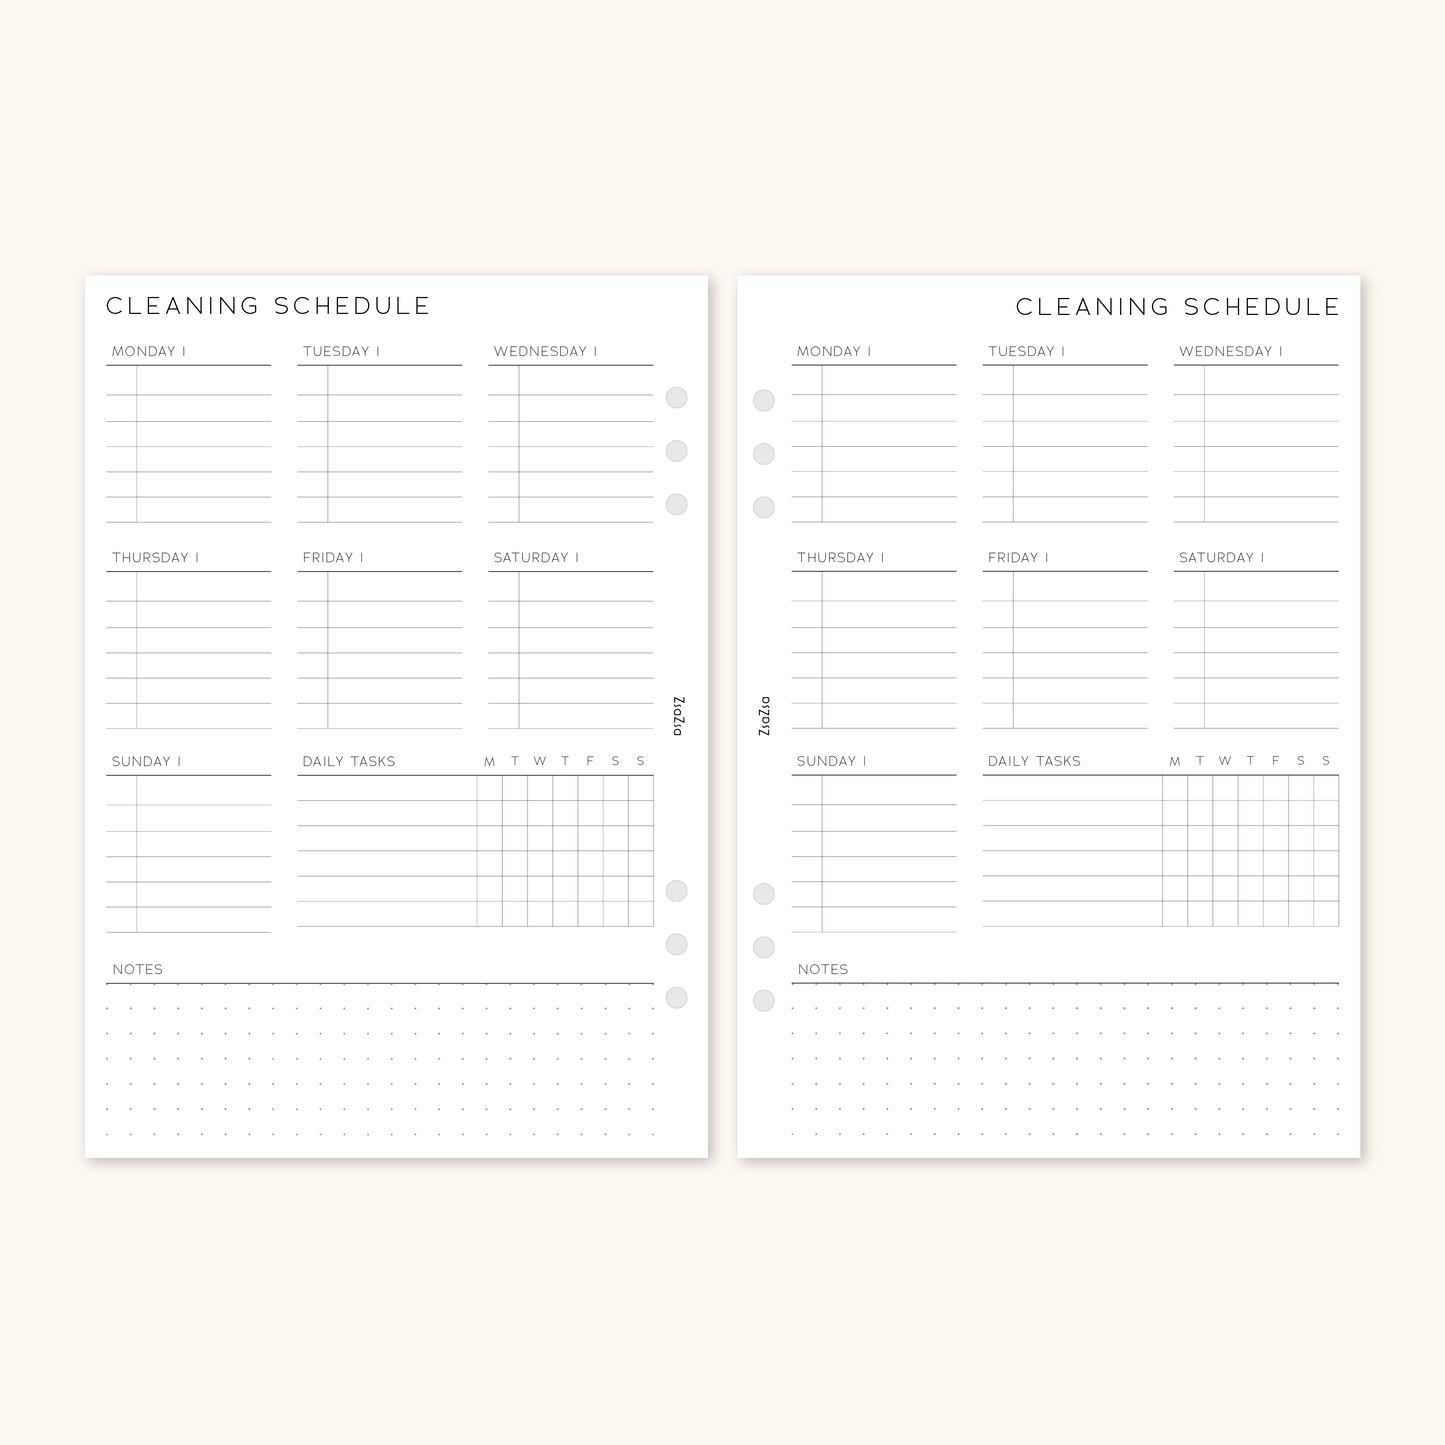 Weekly Cleaning Schedule Planner Insert